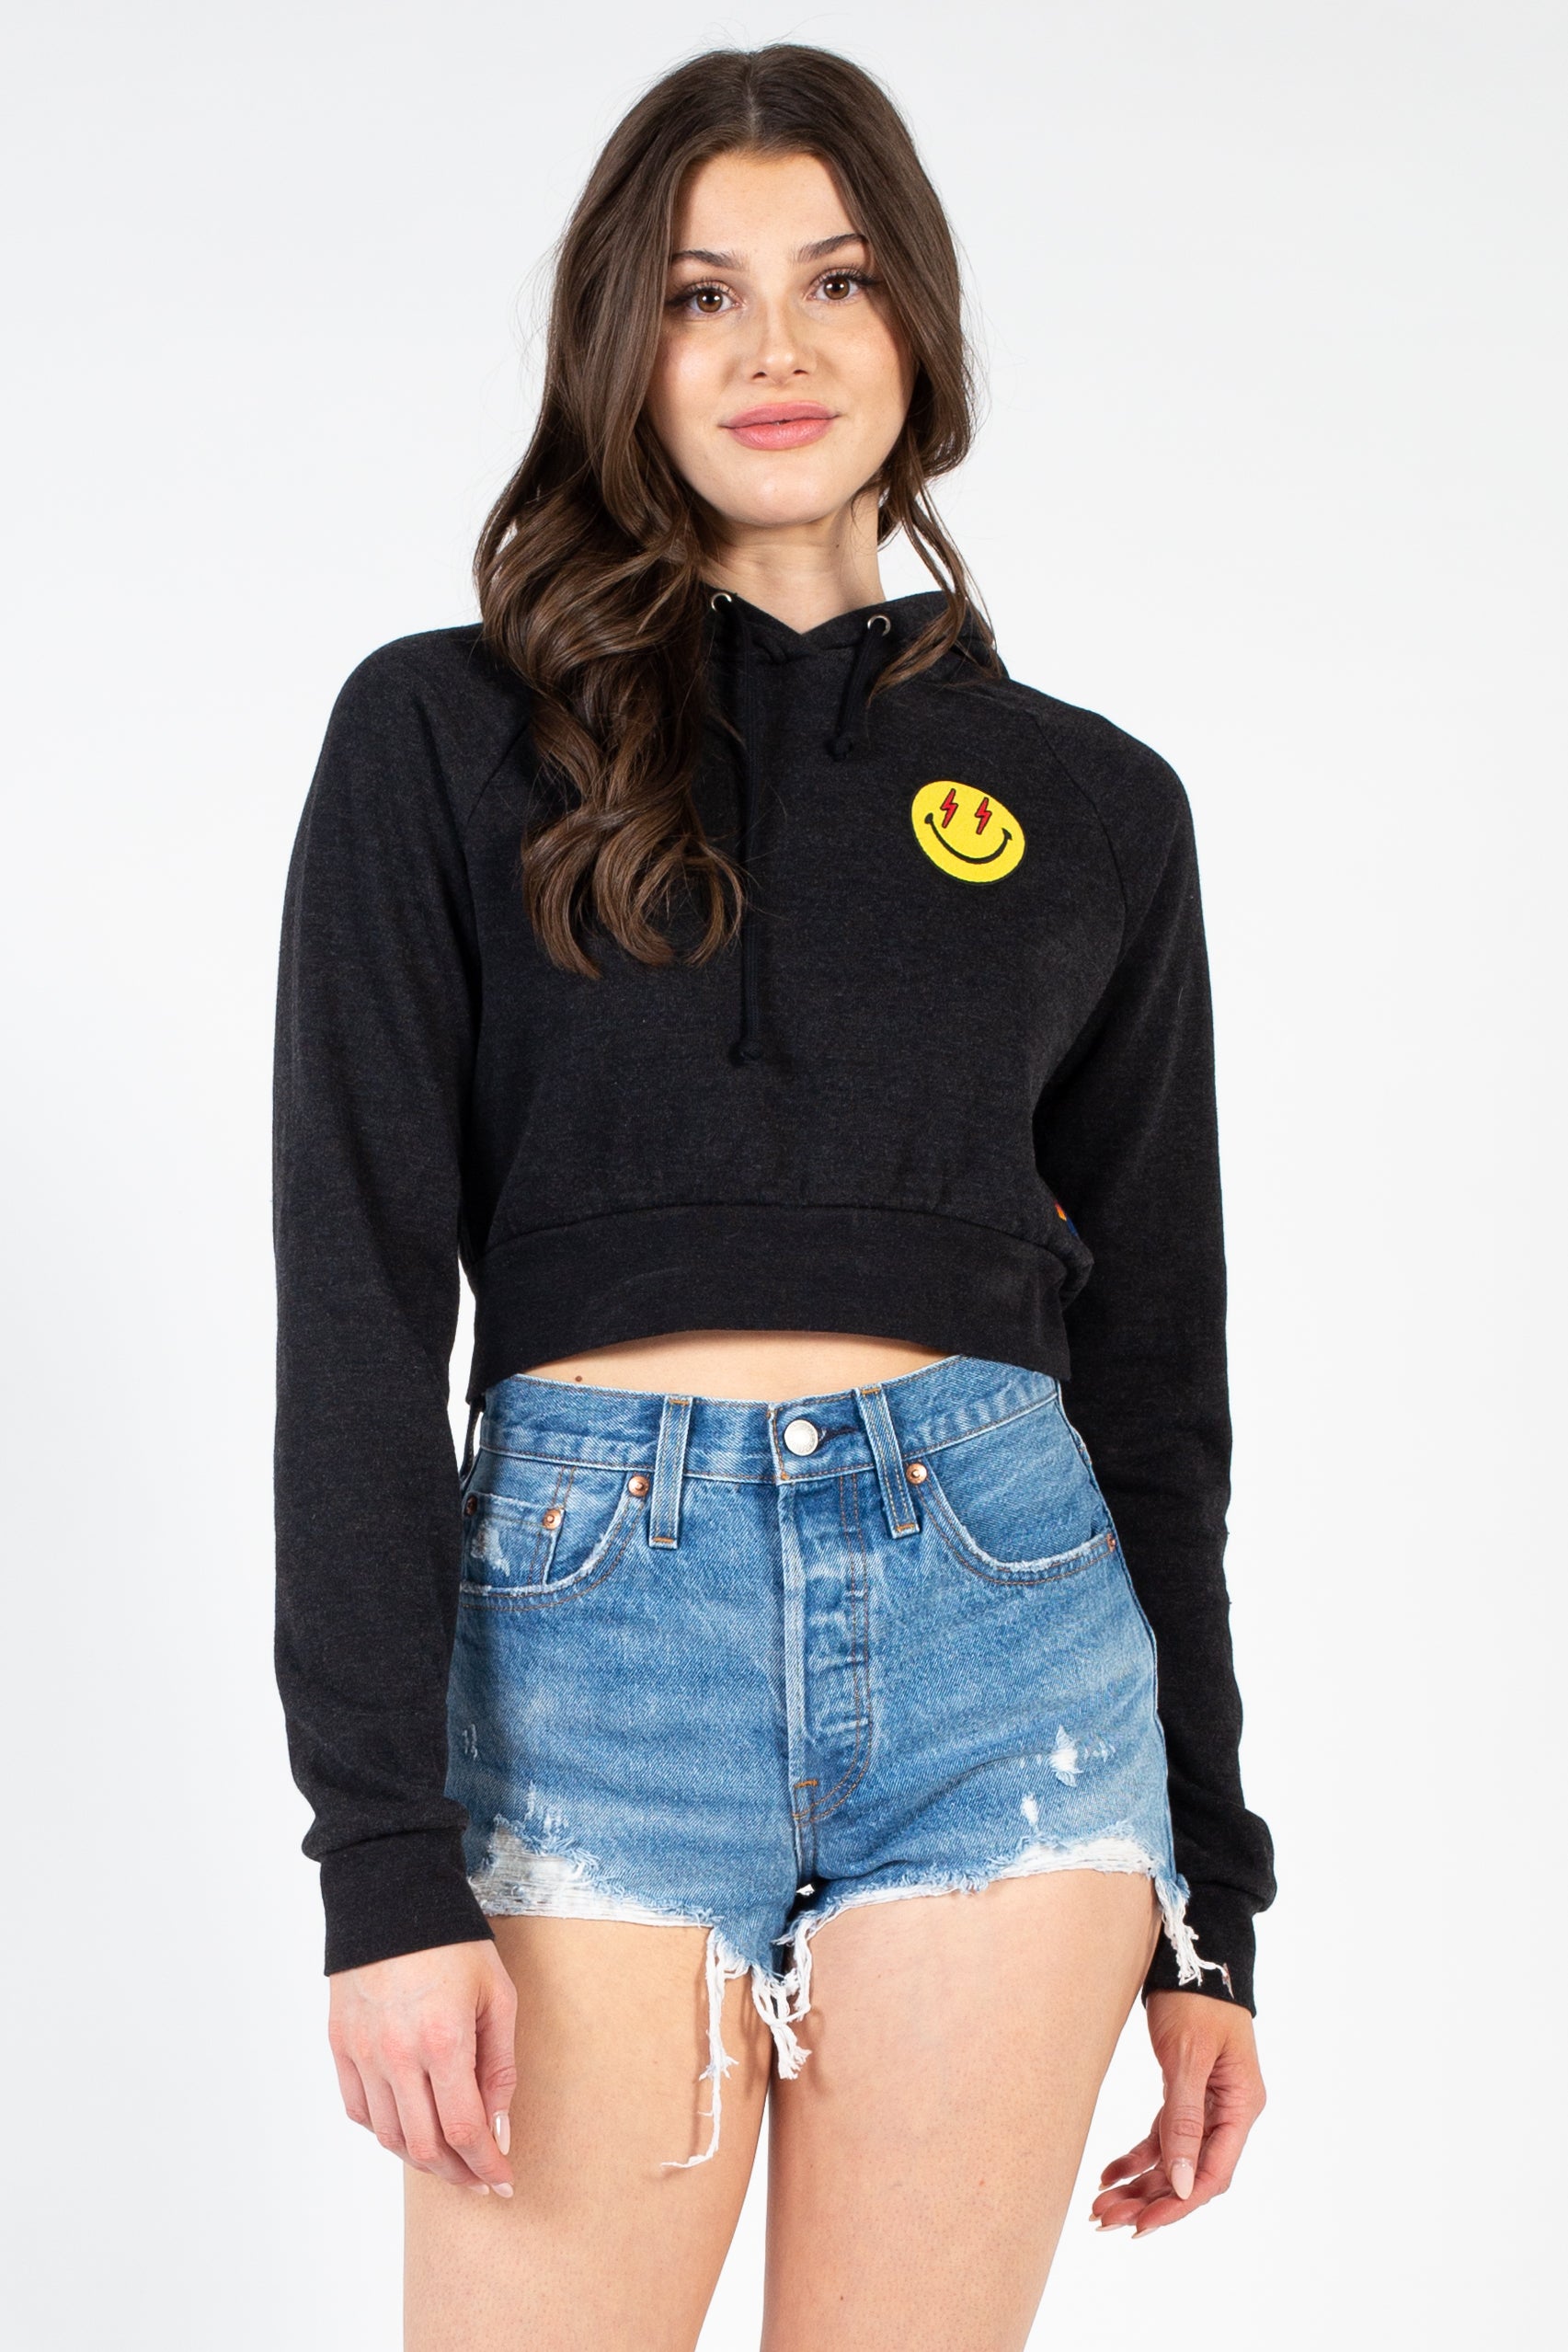 Aviator Nation Smiley Bolt Eyes Cropped Hoodie